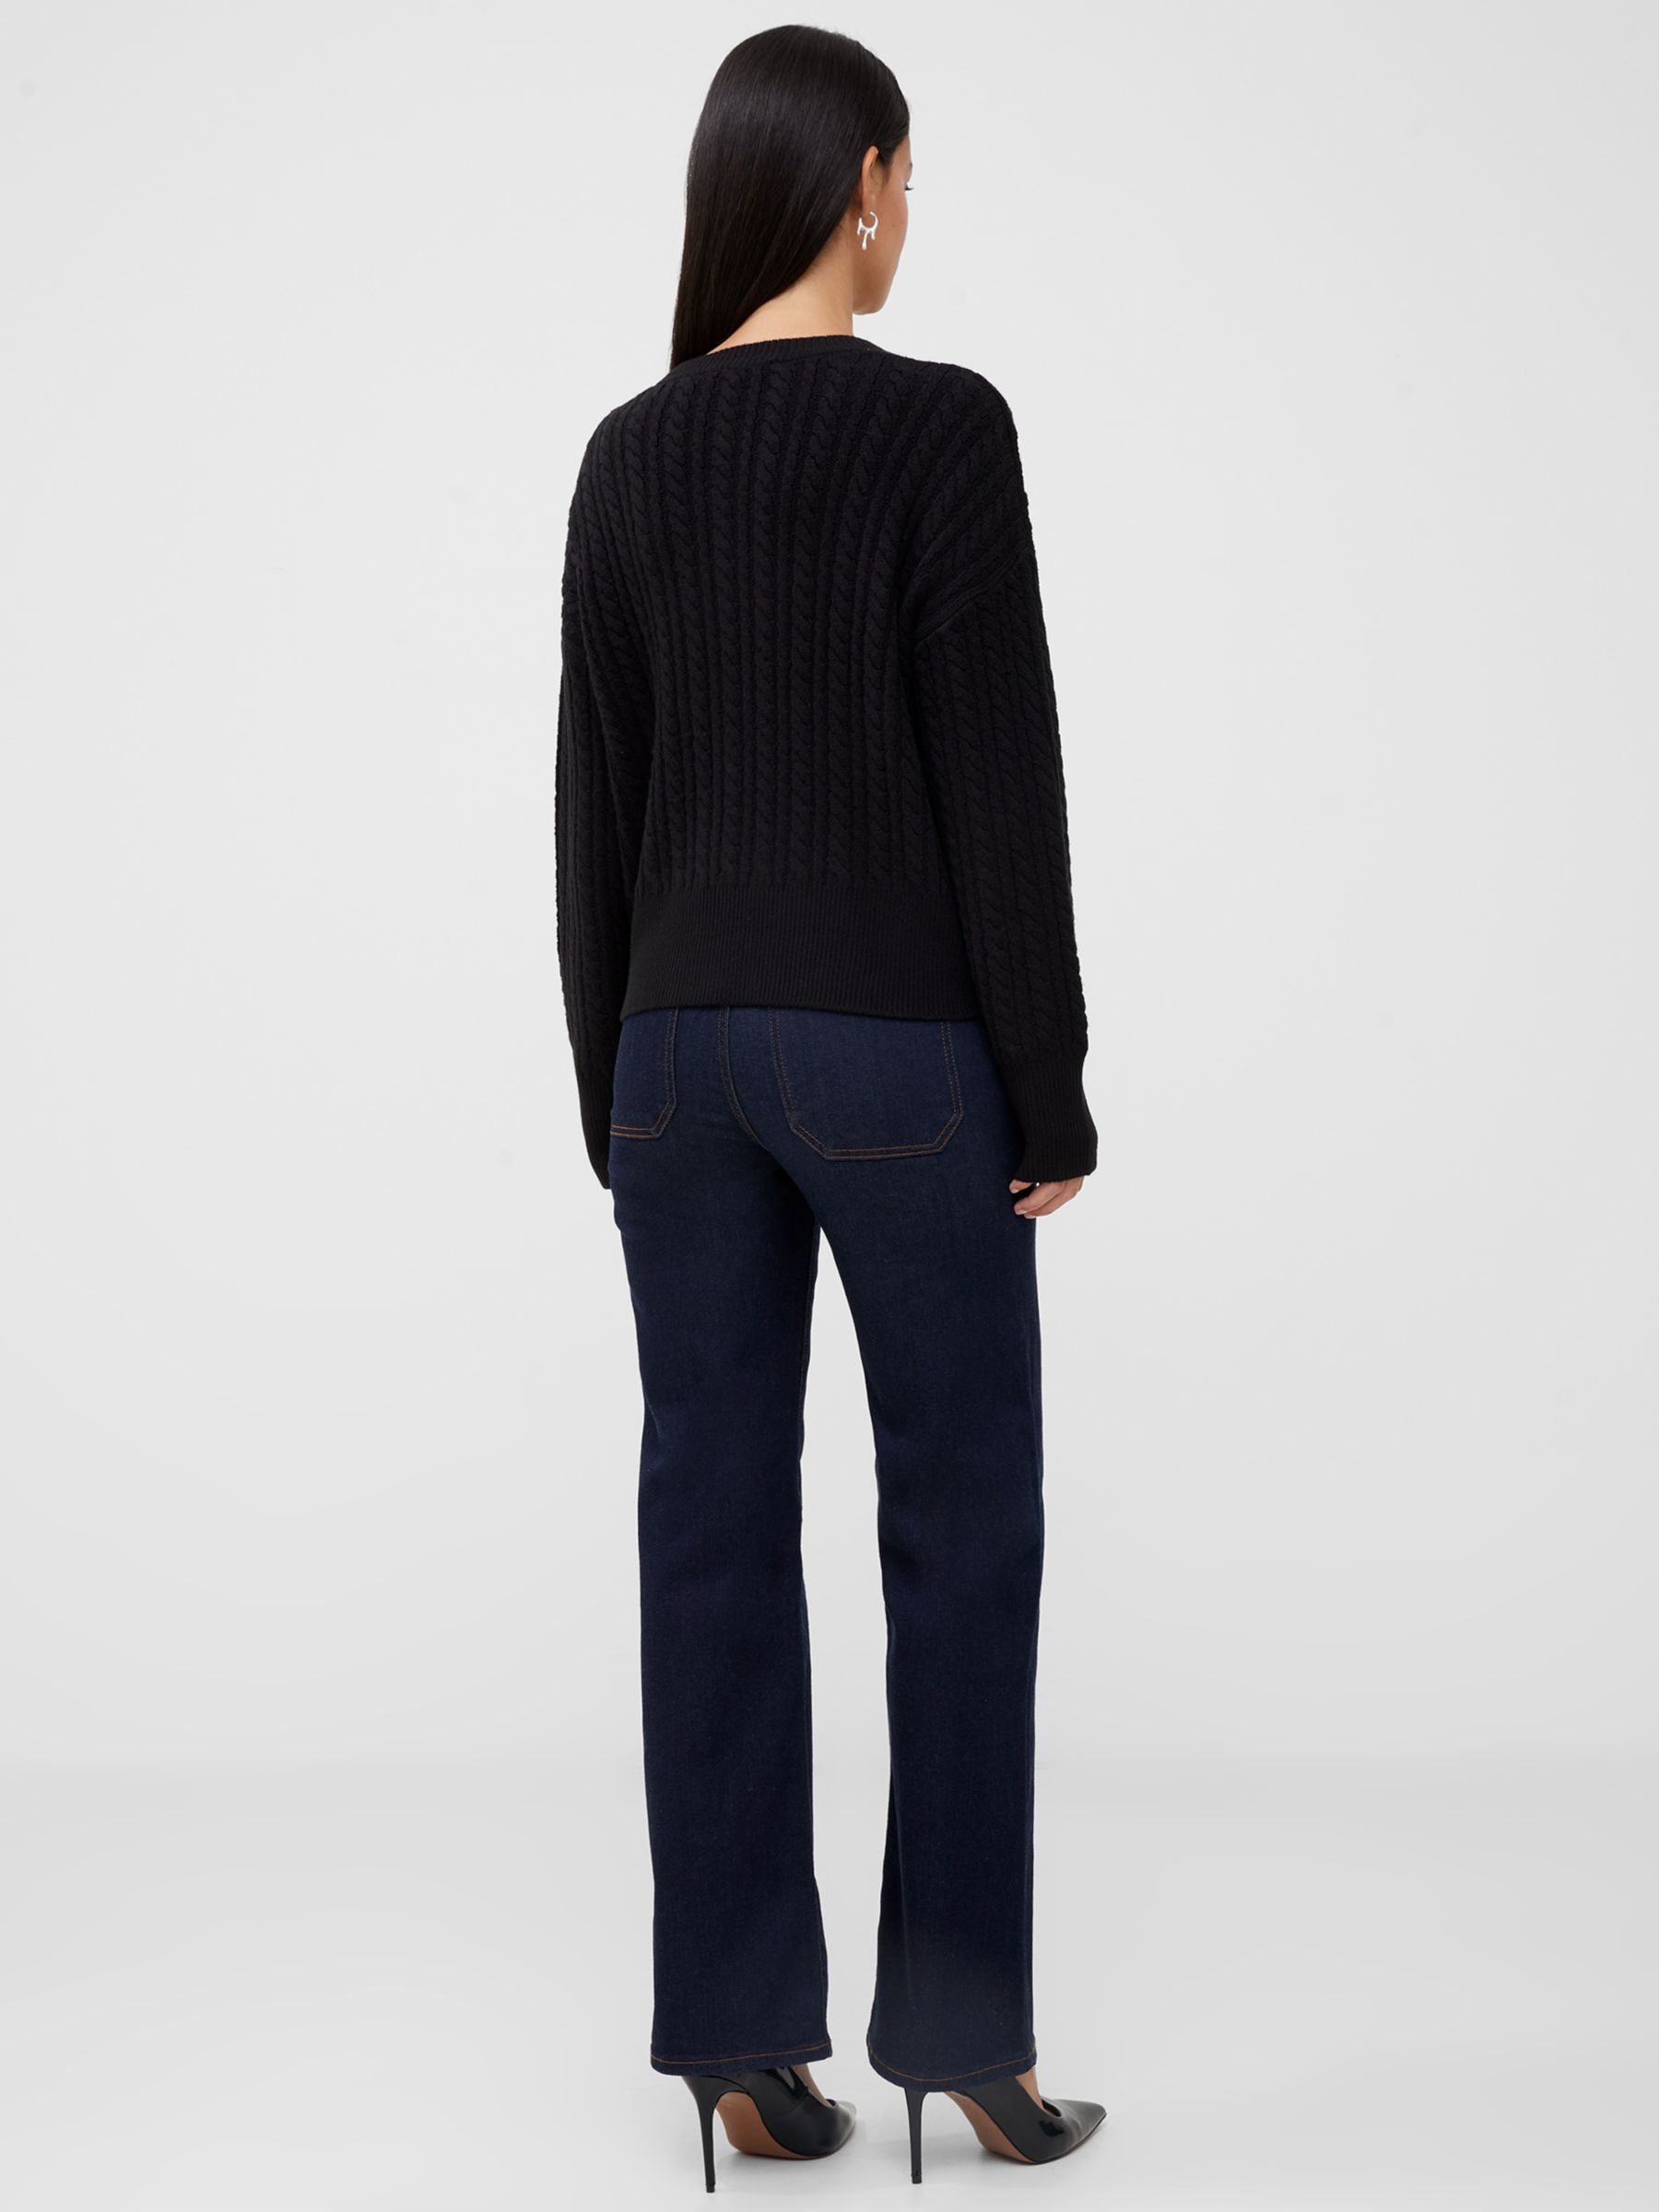 French Connection Babysoft Cable Knit Cardigan, Black at John Lewis ...